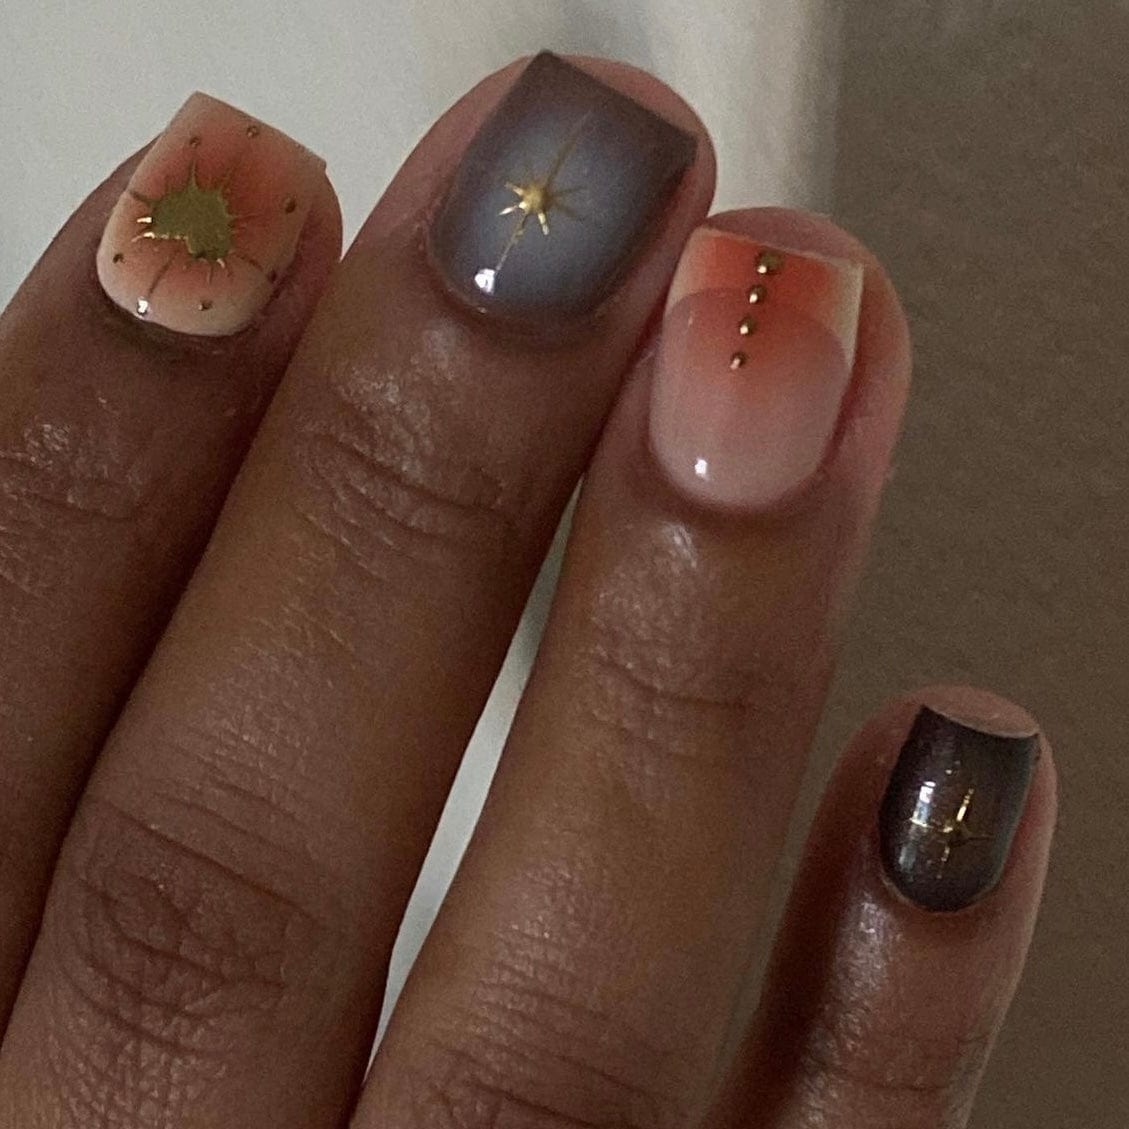 50 Gorgeous And Lovely Spring Square Nail Designs For You - Women Fashion  Lifestyle Blog Shinecoco.com | Nagels gel, Vierkante nagels, Stijlvolle  nagels